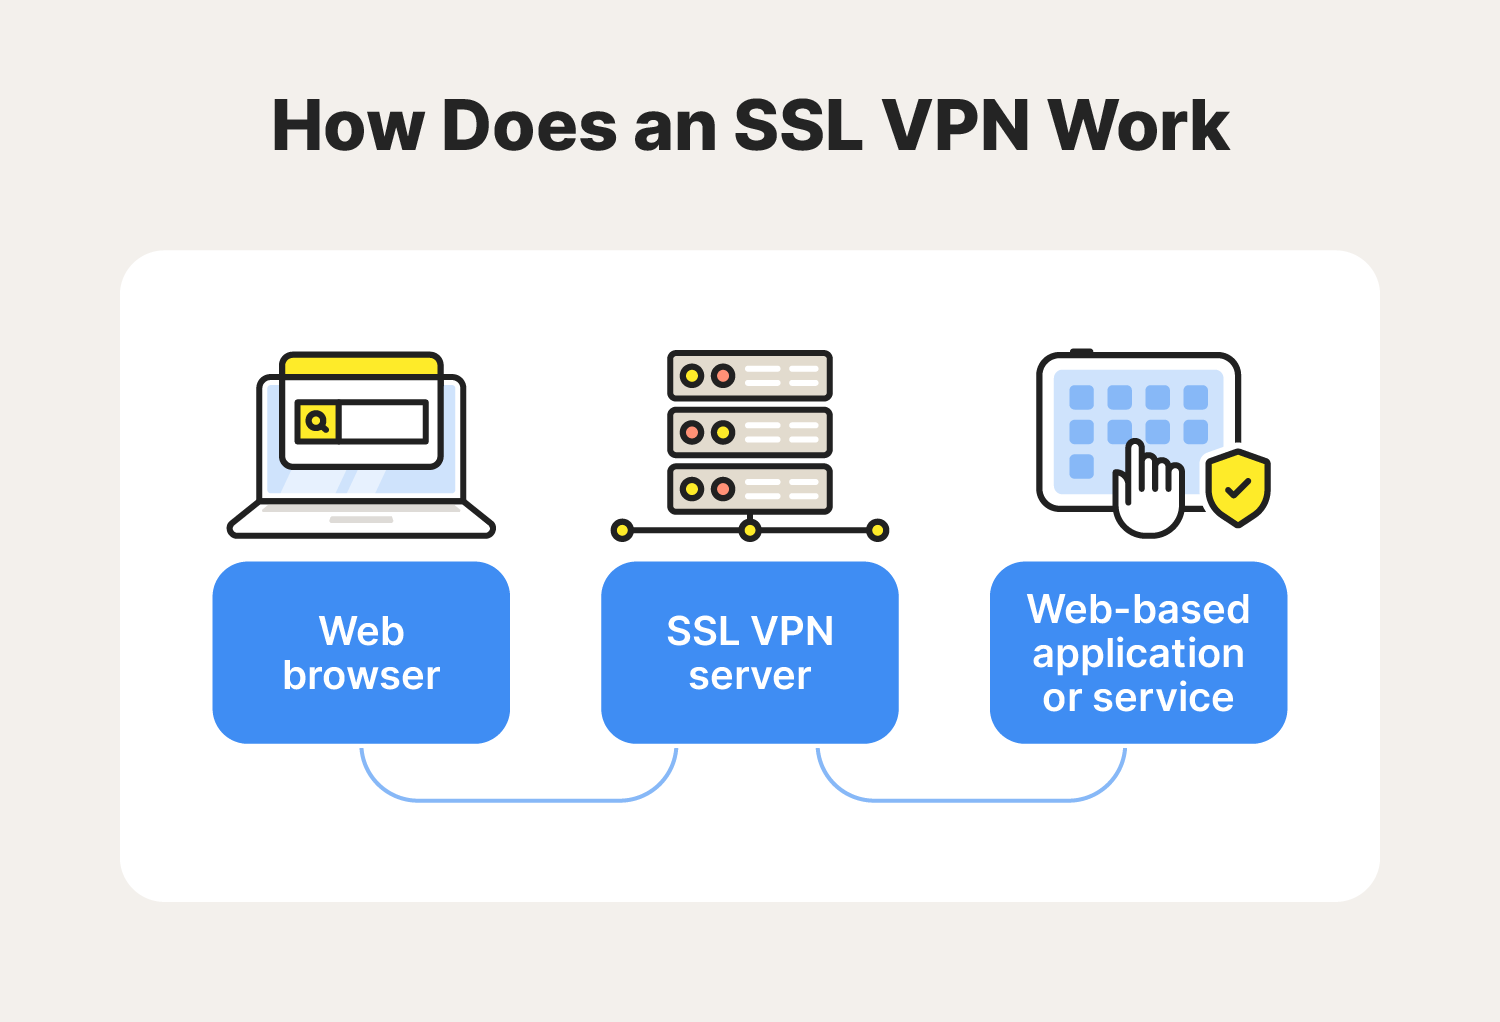 A diagram showing how an SSL VPN works.